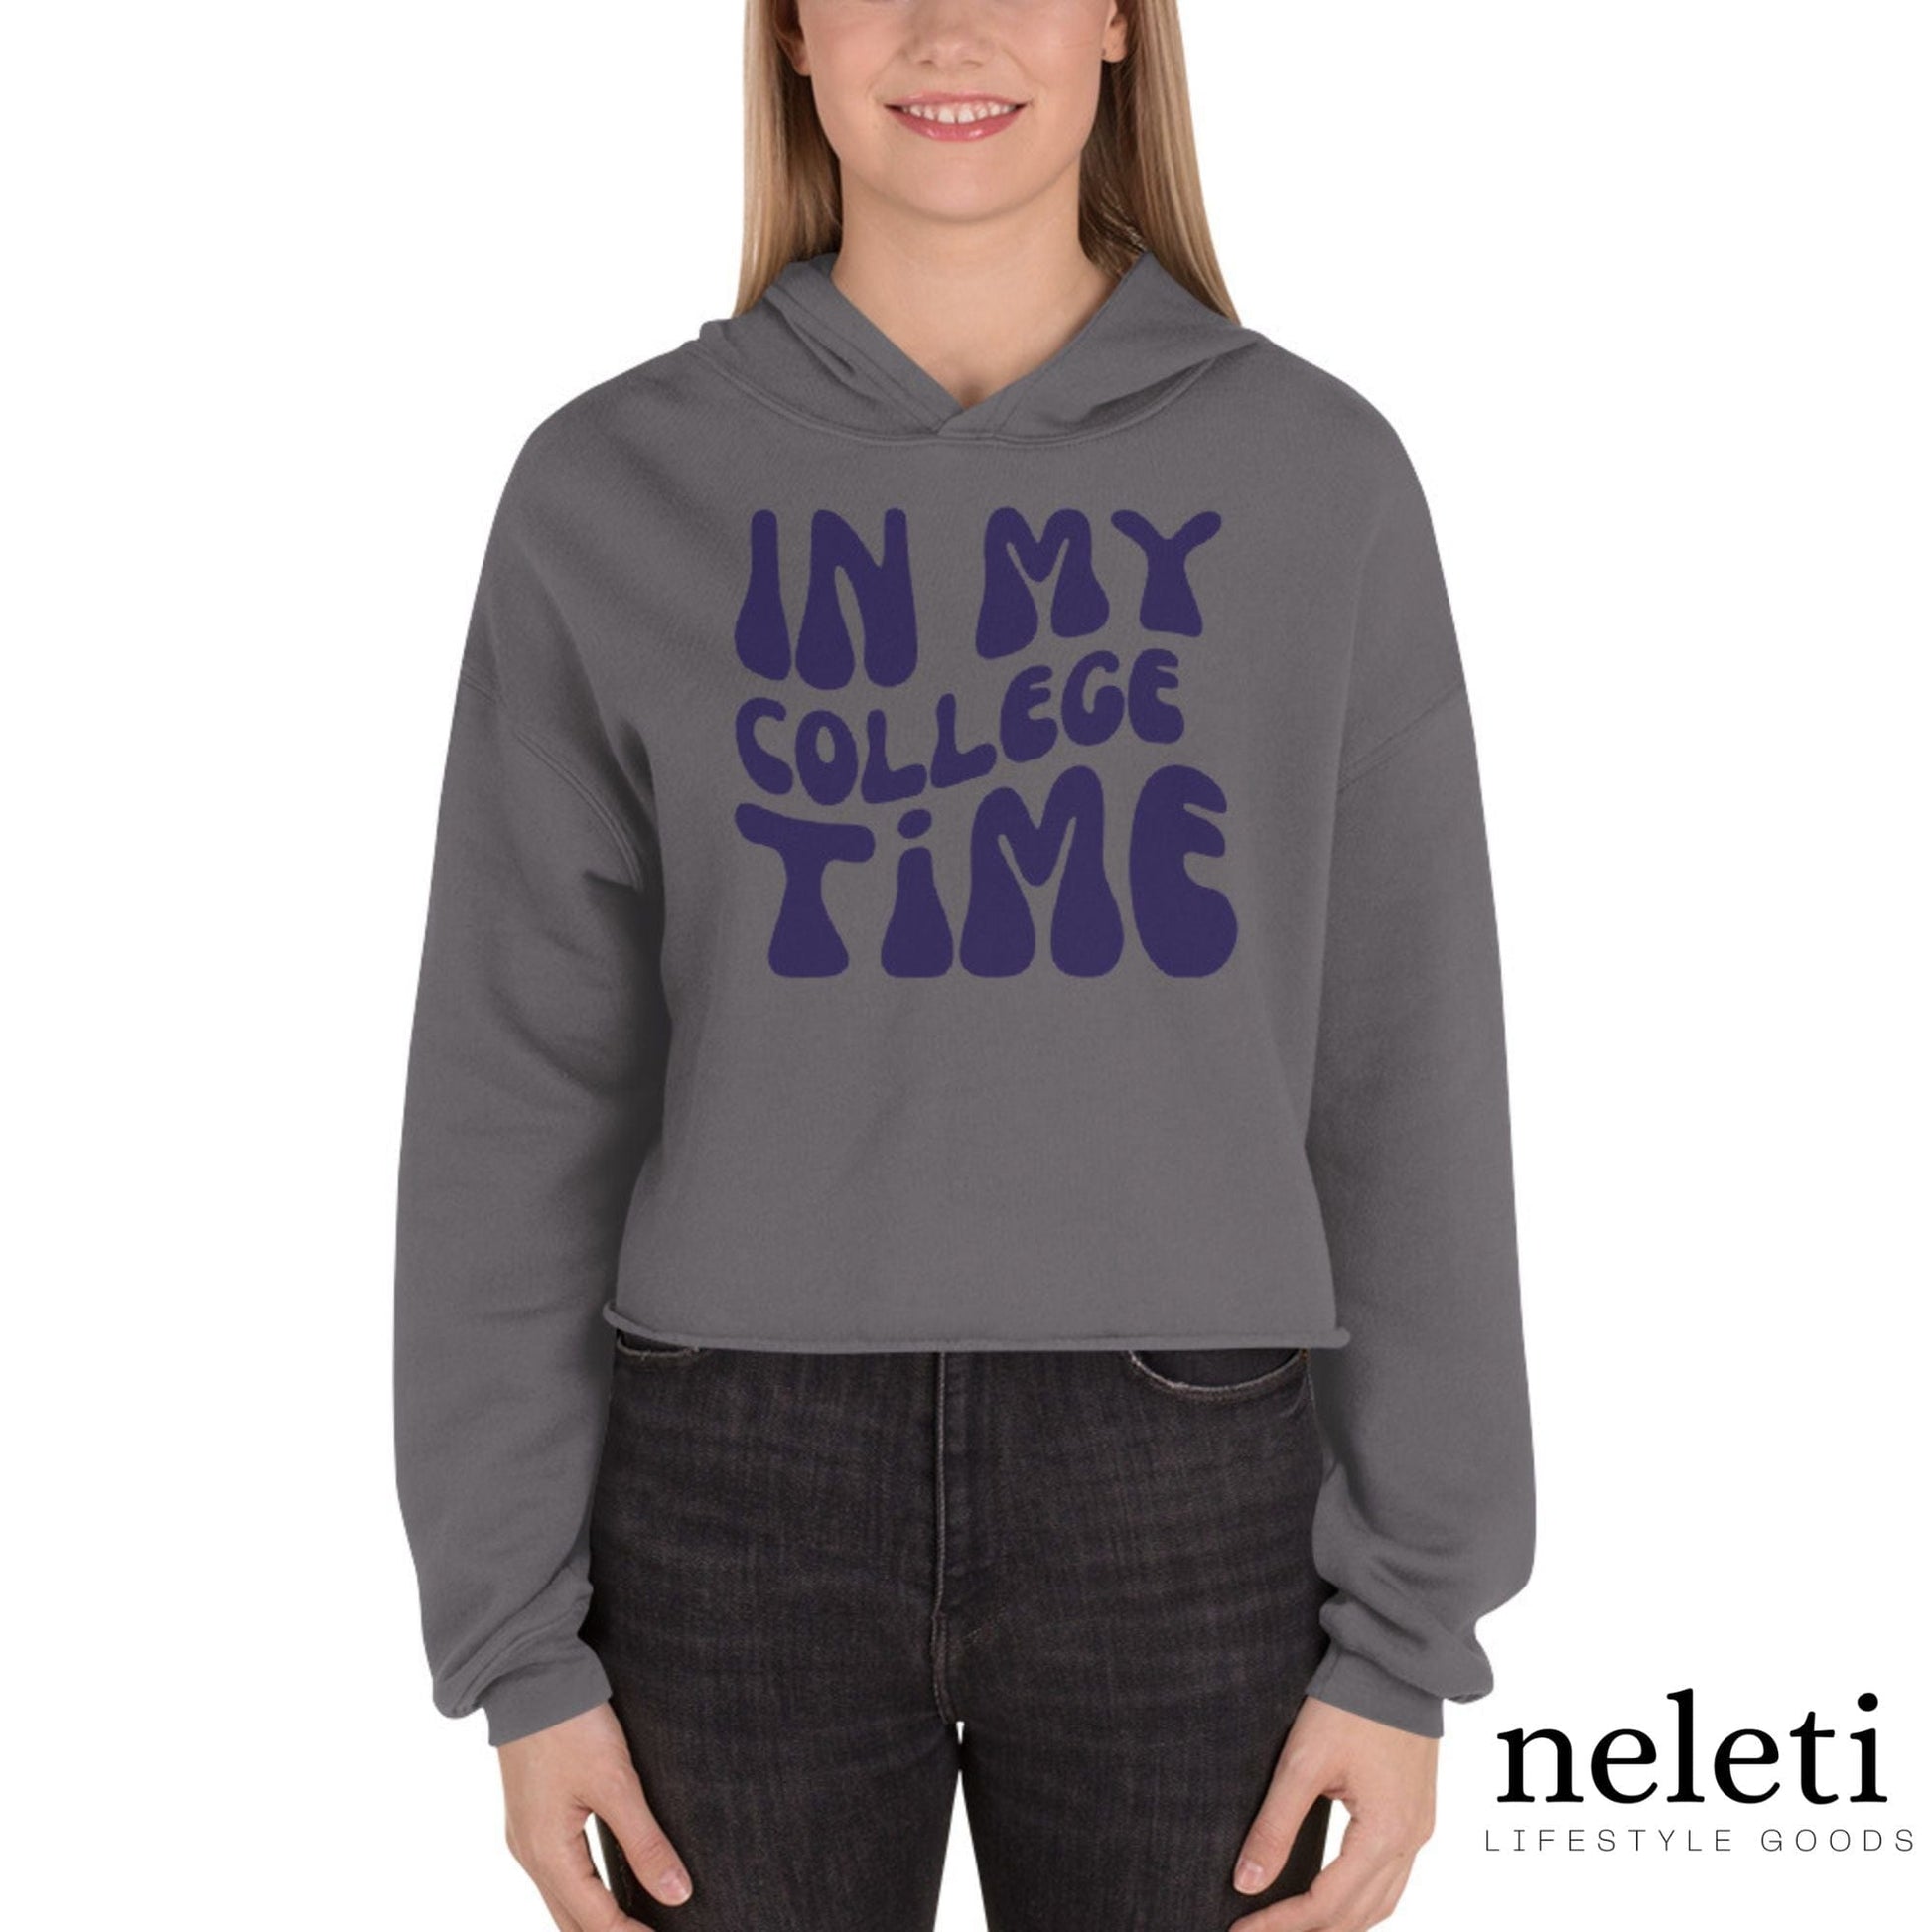    neleti.com-crop-hoodie-in-storm-color-for-college-student_